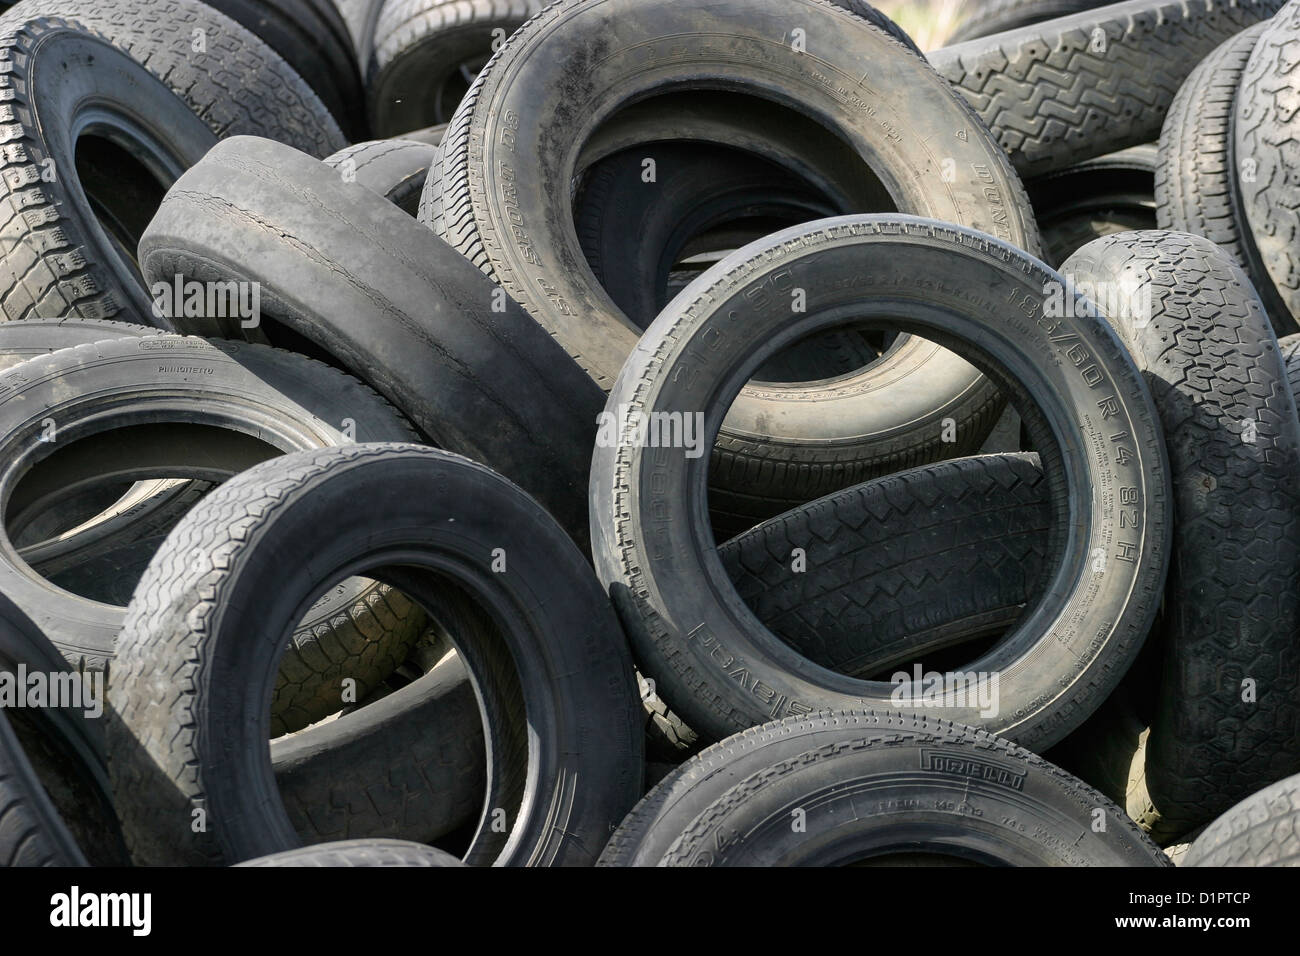 Old tires to be recycled Stock Photo